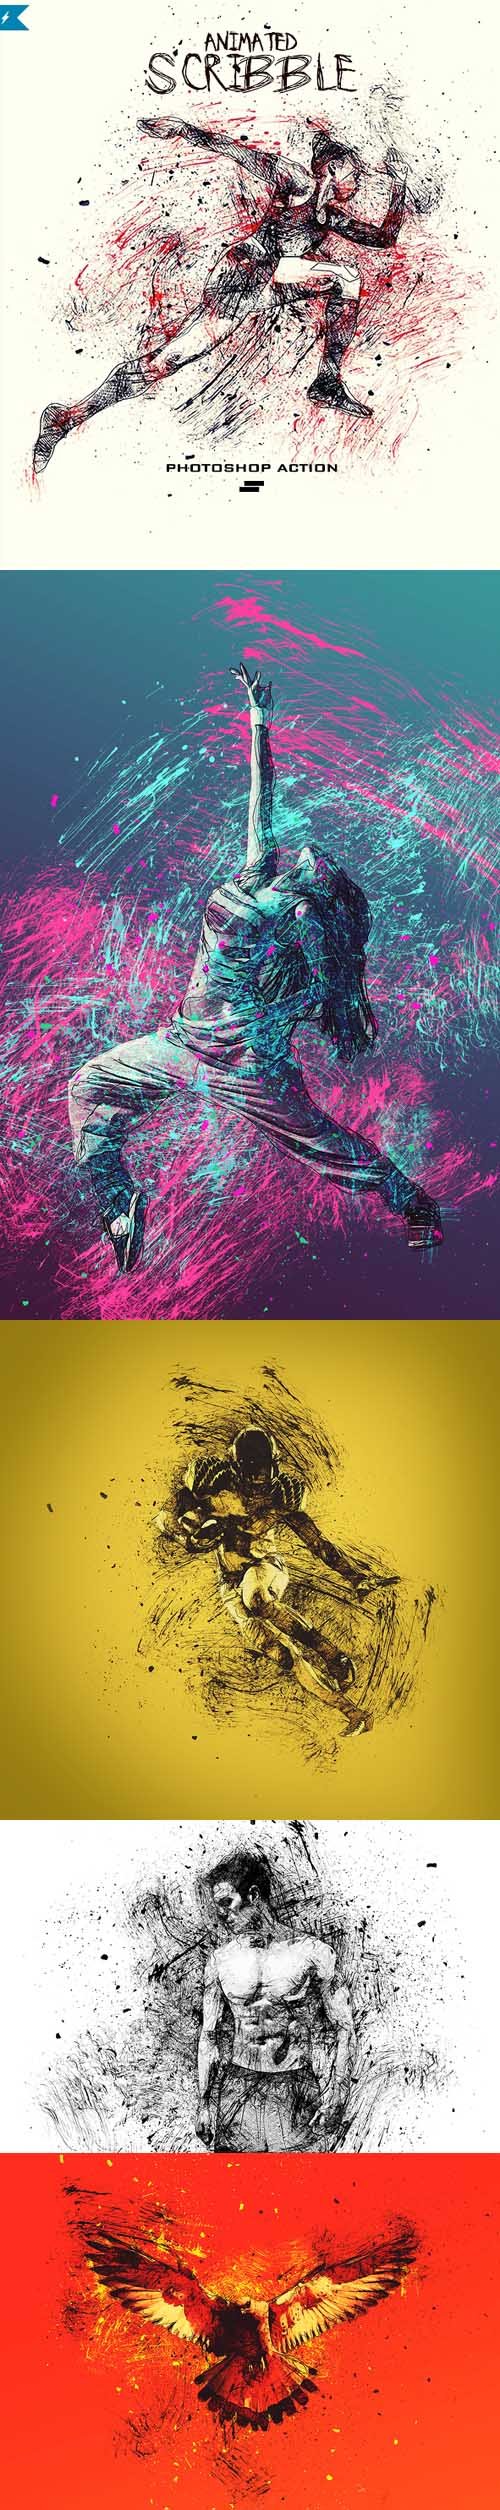 GraphicRiver - Gif Animated Ink Scribbles Photoshop Action - 19970128